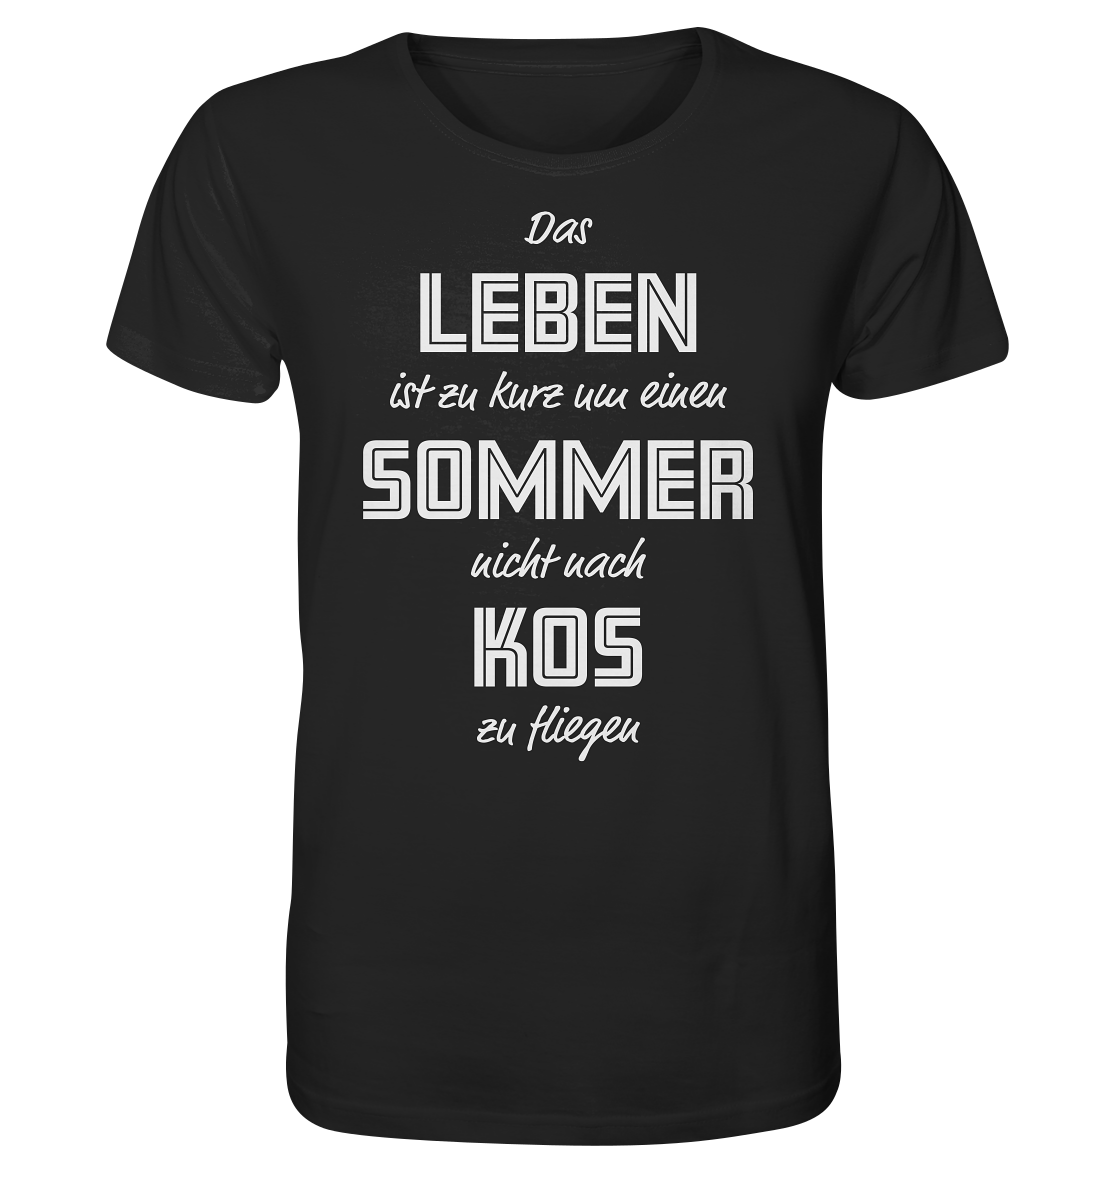 Life is too short not to fly to Kos for a summer - Organic Shirt